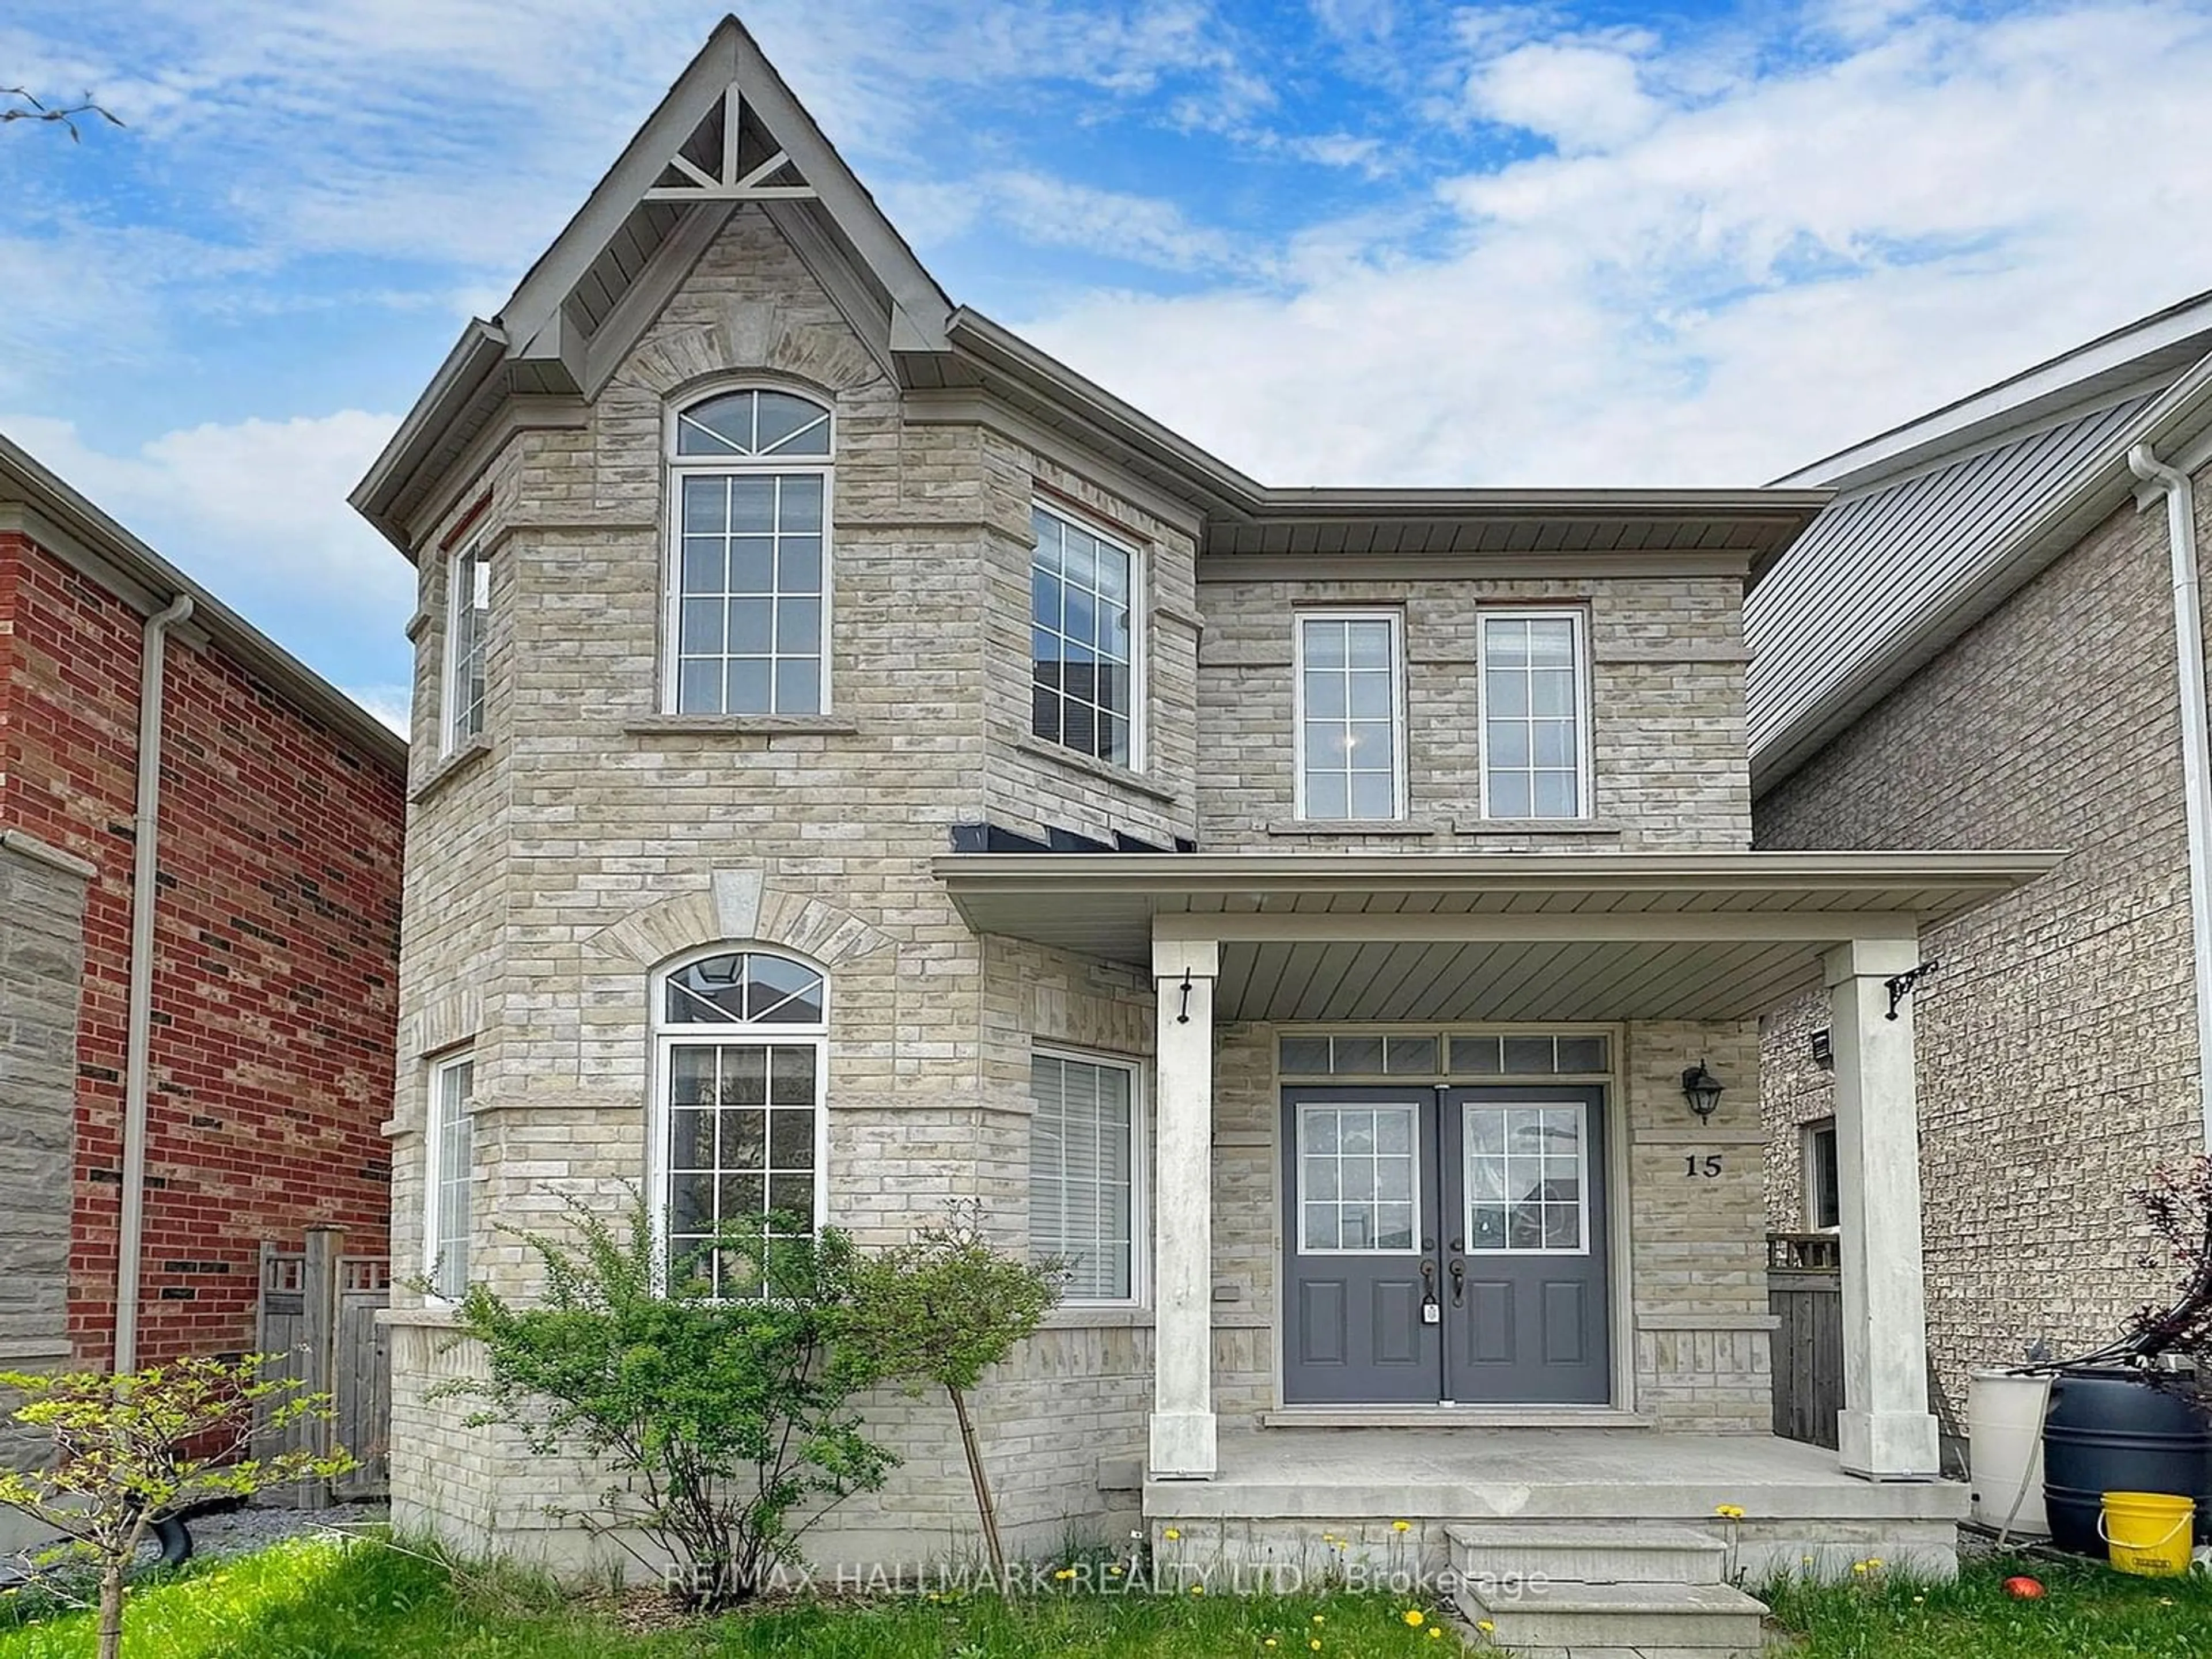 Home with brick exterior material for 15 Welland Rd, Markham Ontario L6B 0N4